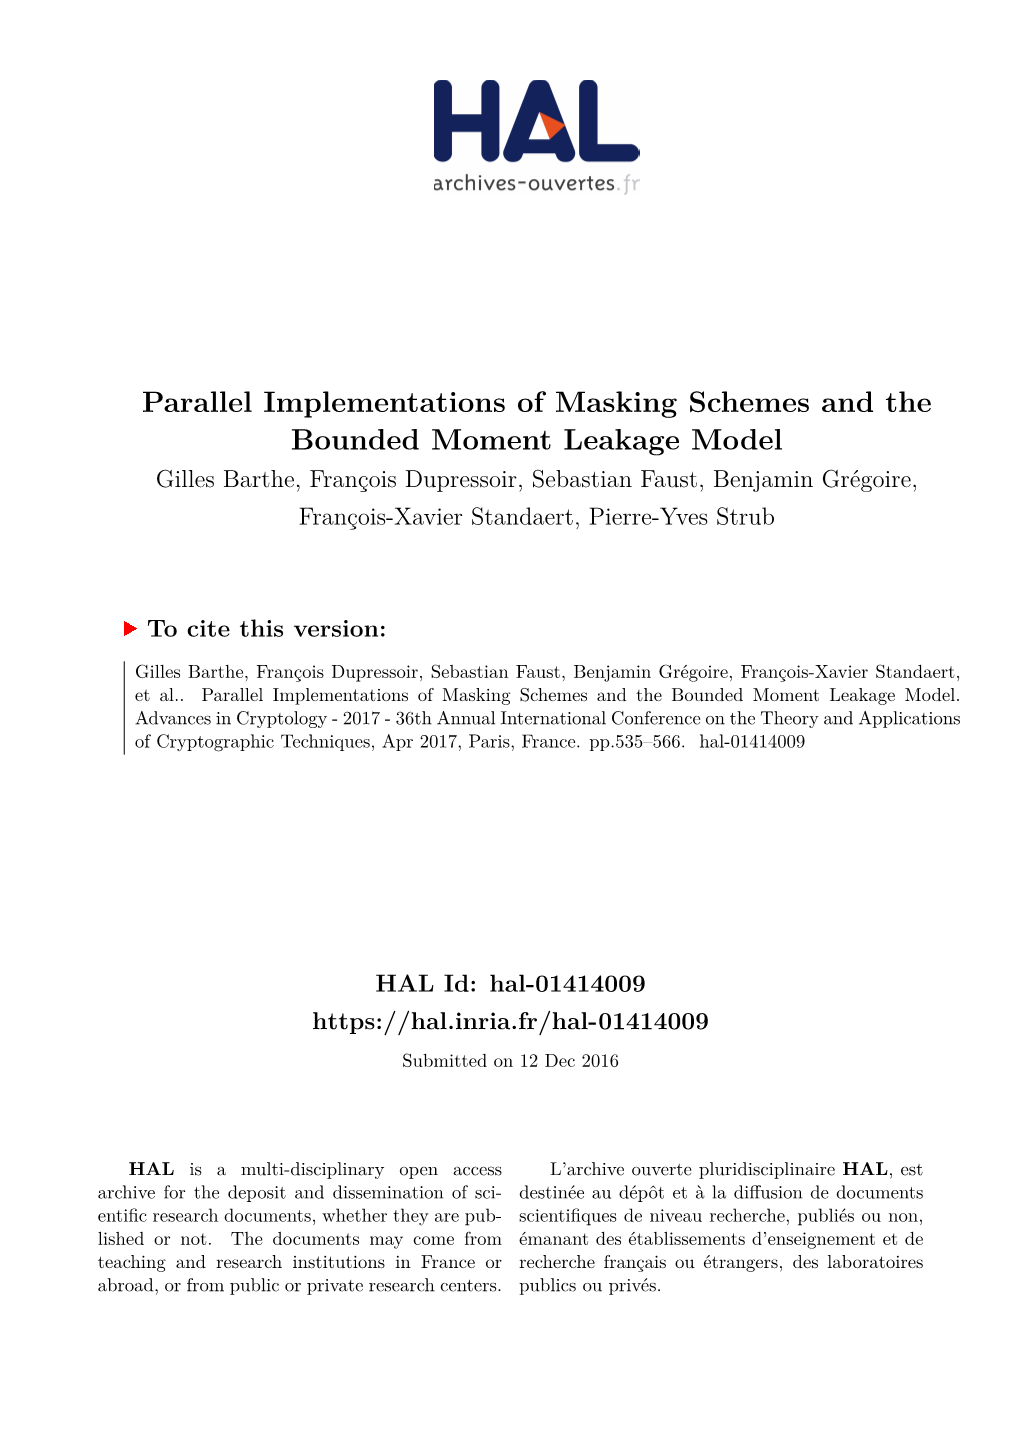 Parallel Implementations of Masking Schemes and the Bounded Moment